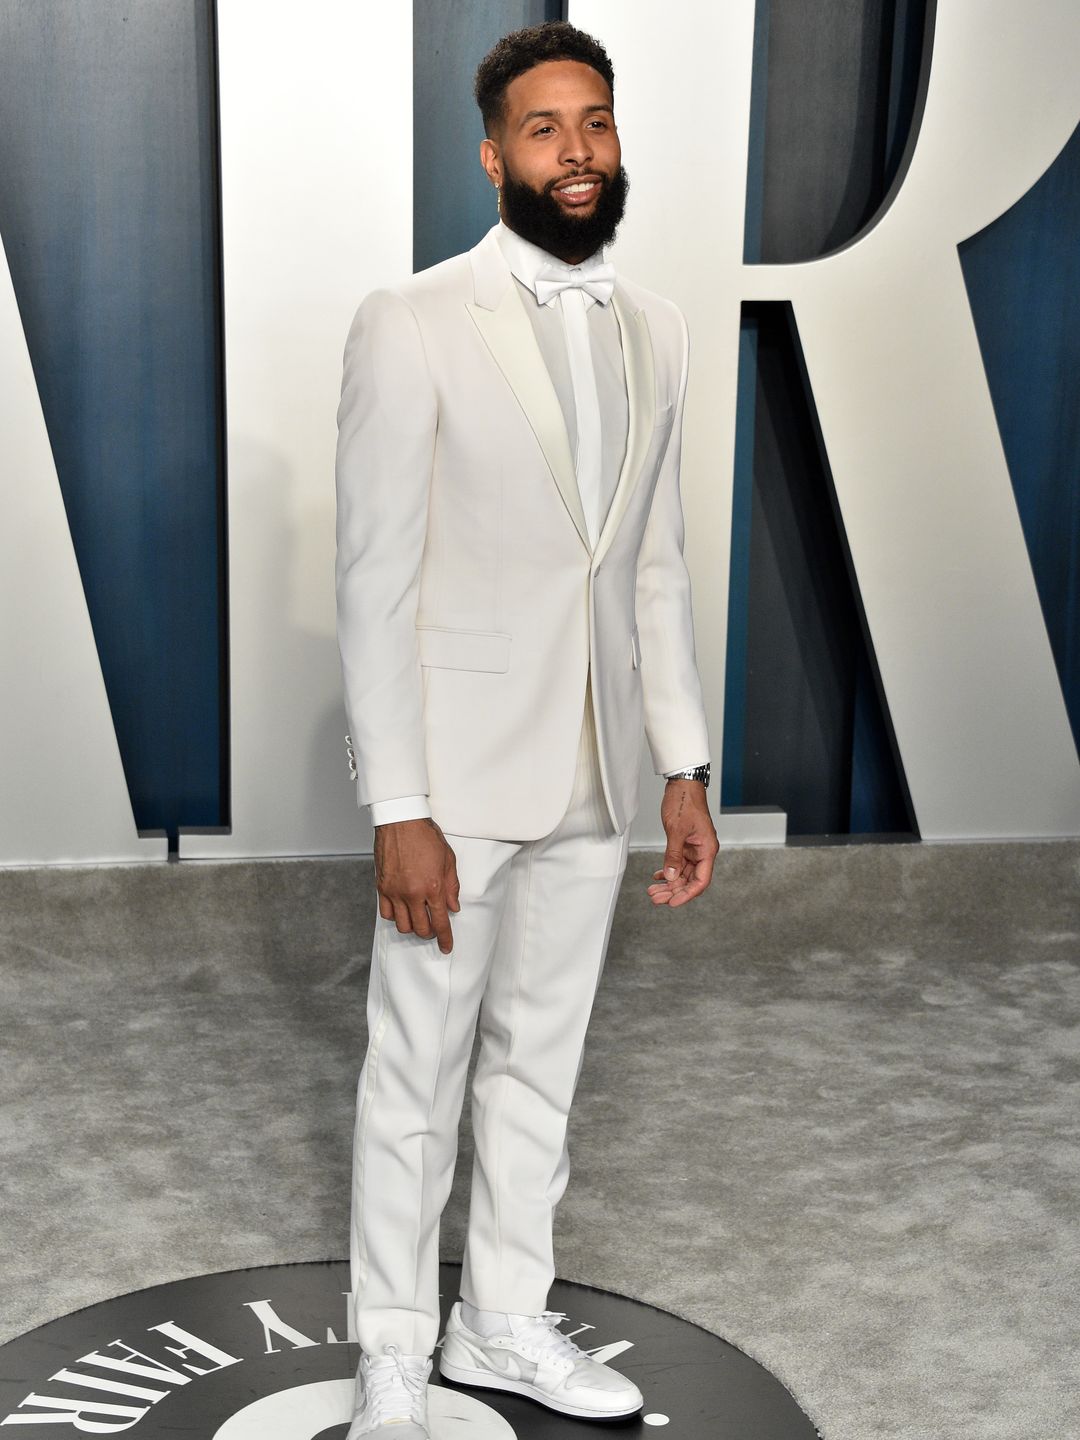 dell Beckham Jr. attends the 2020 Vanity Fair Oscar Party in an all-white tuxedo